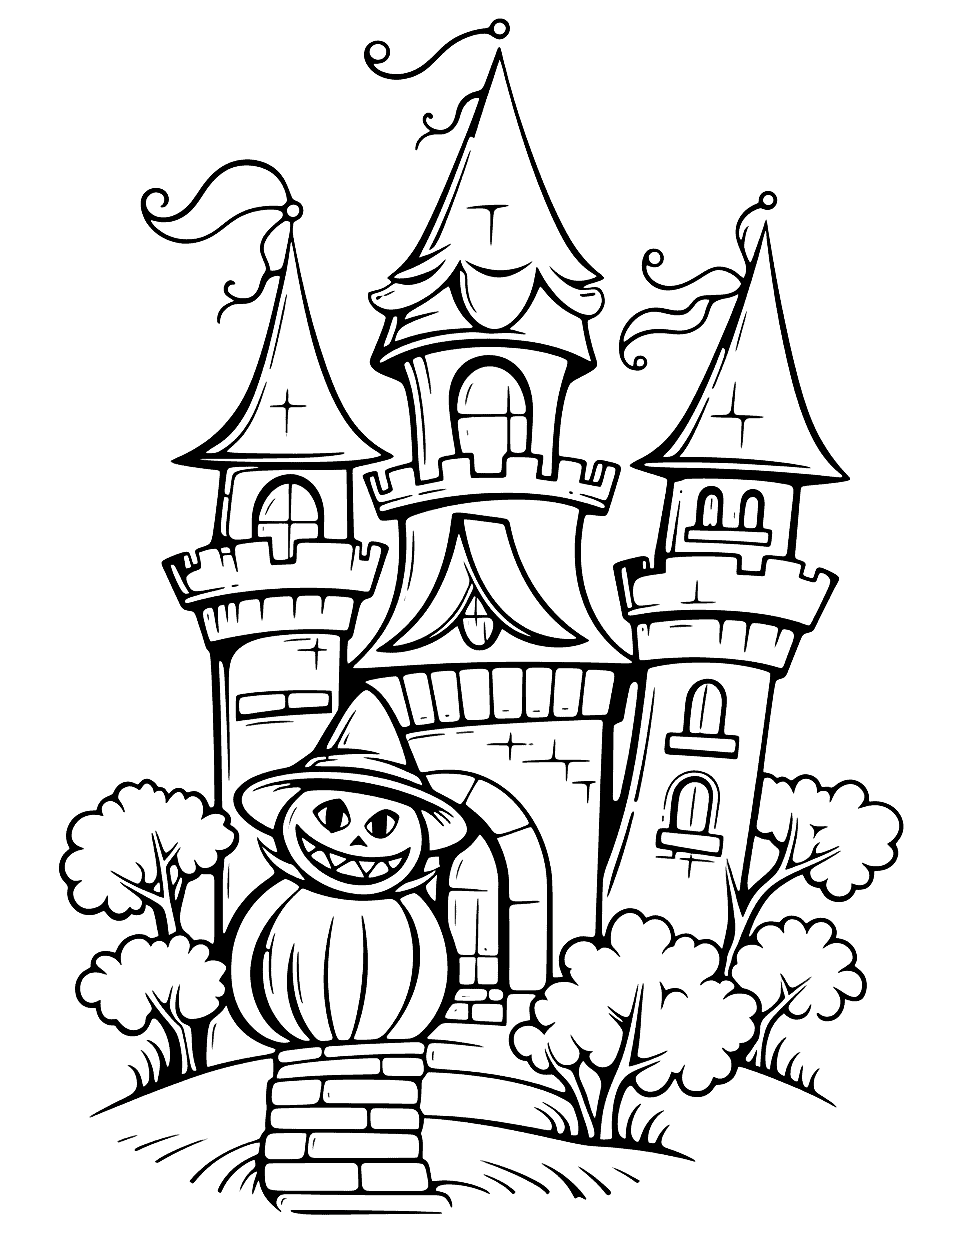 Vampire's Castle Halloween Coloring Page - A detailed image of a vampire’s castle with a scary pumpkin figure at the front.